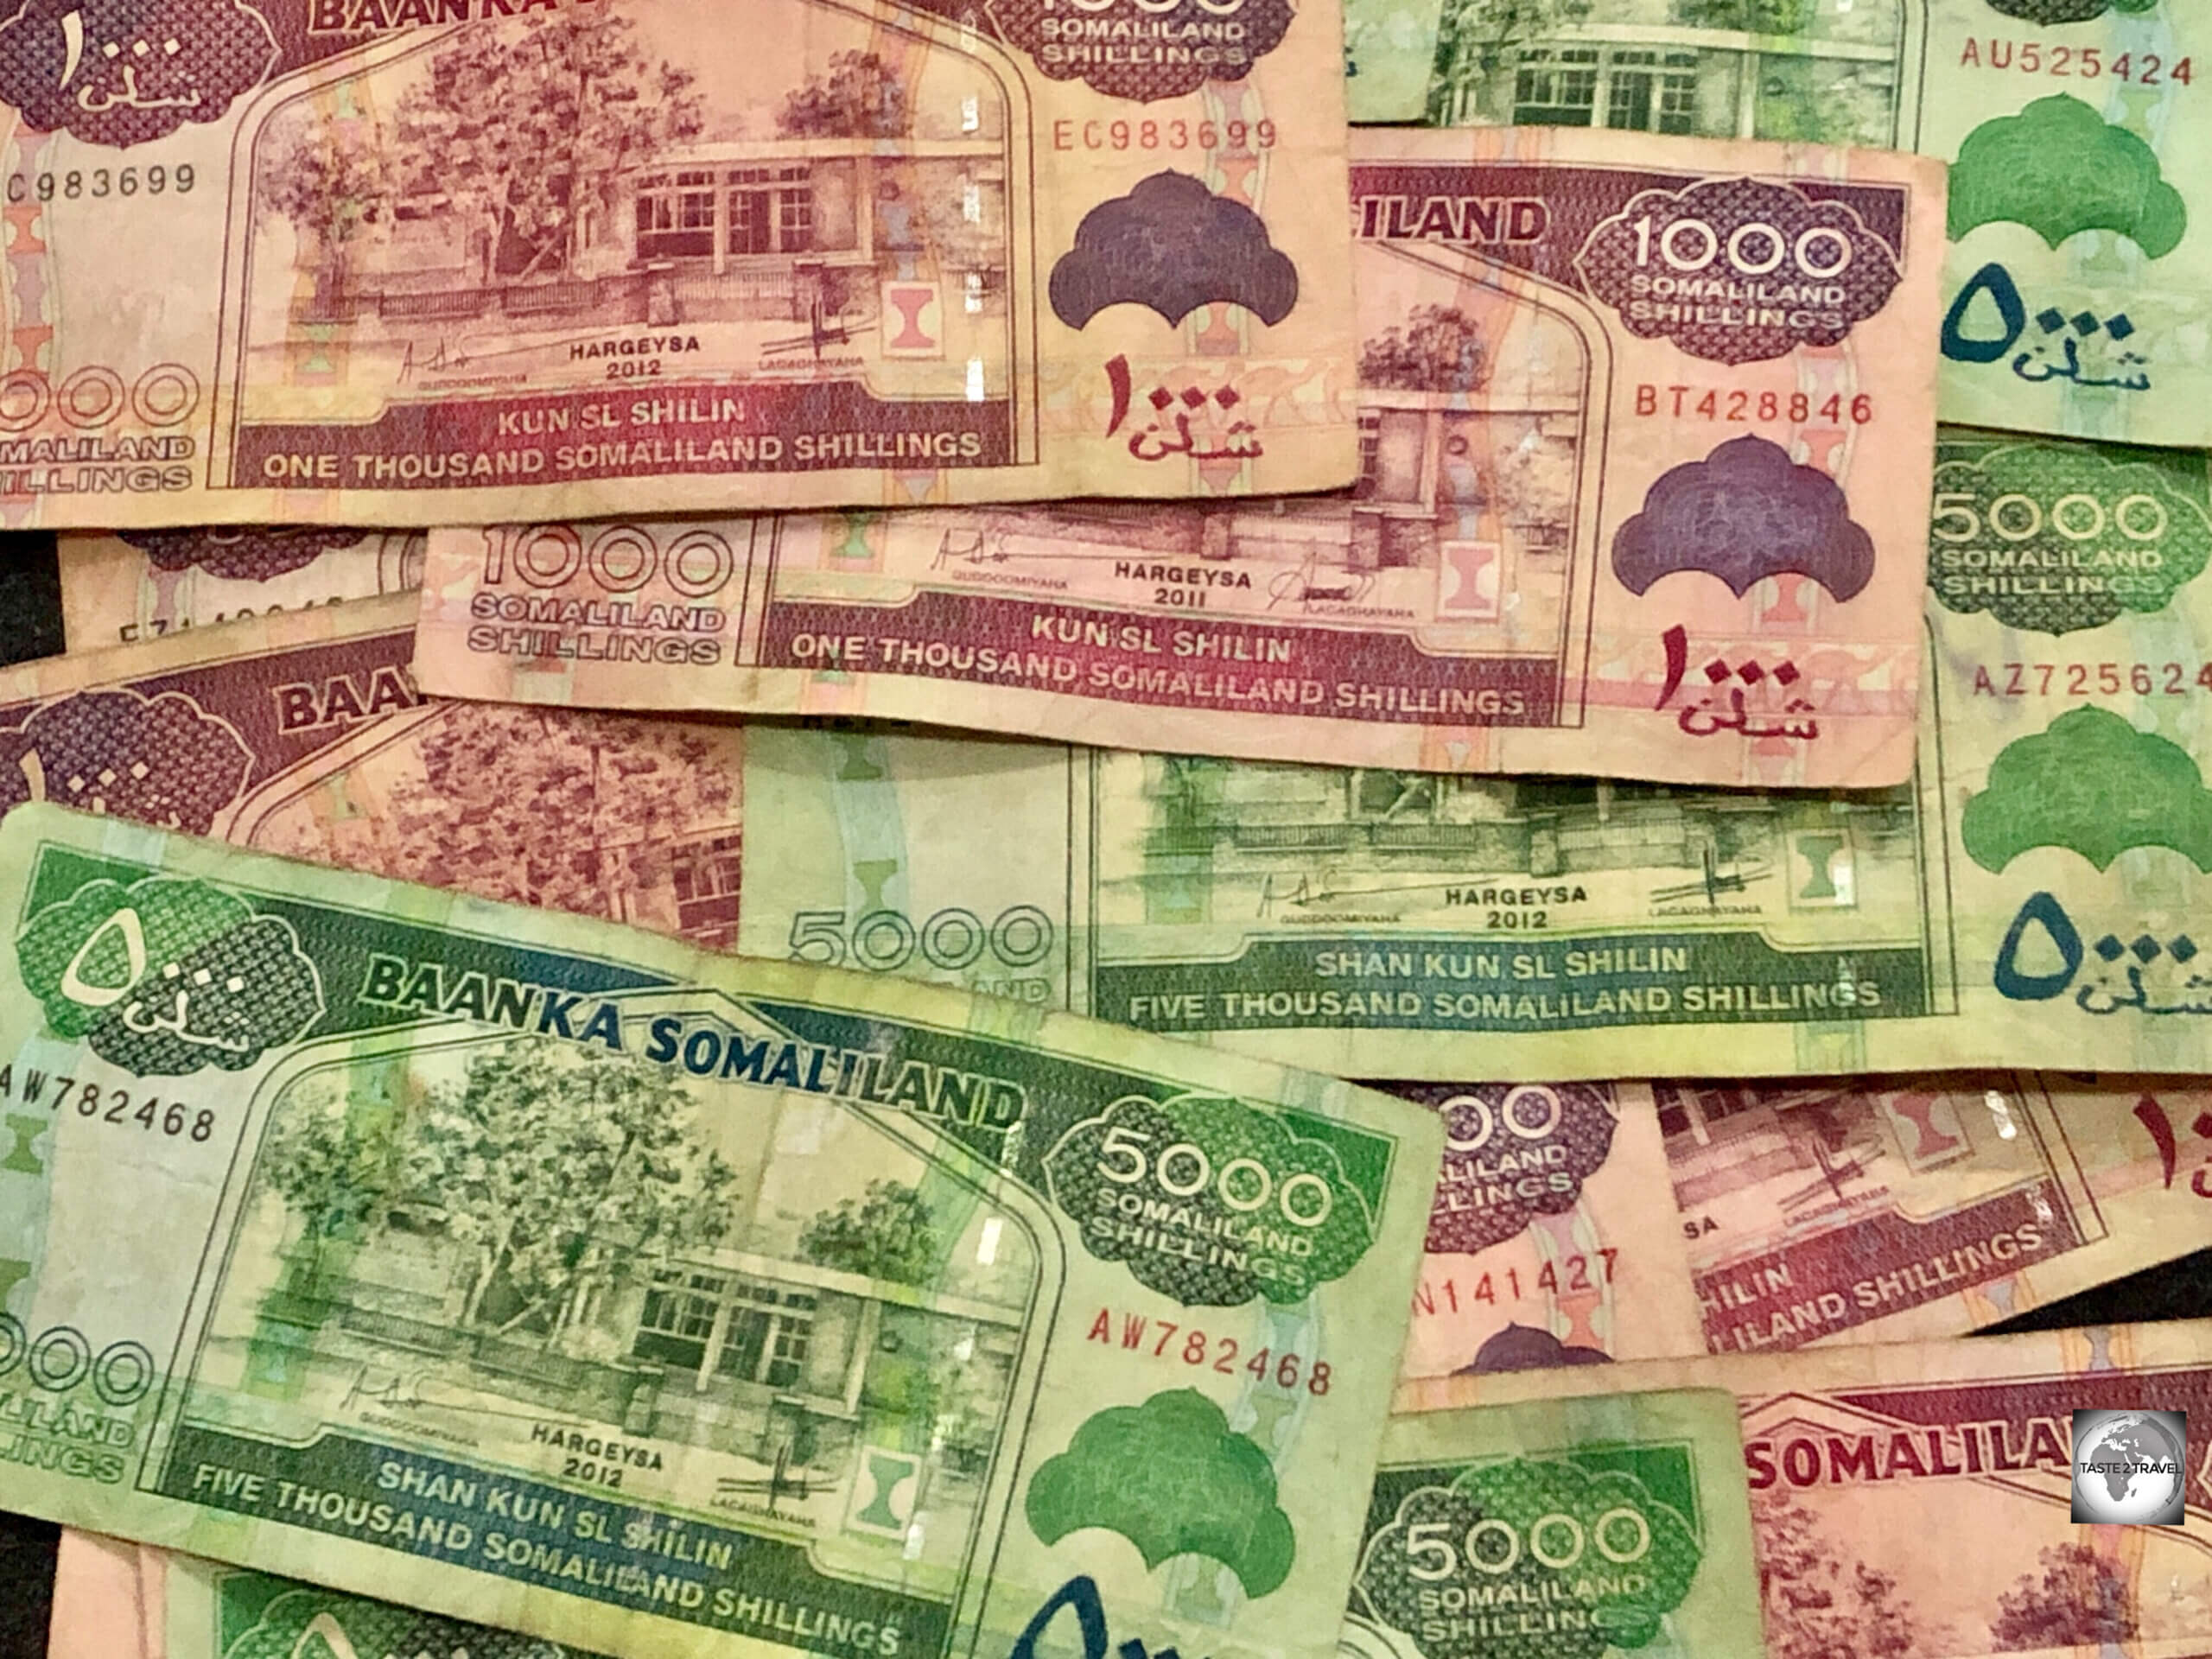 The currency of Somaliland is the Somaliland shilling. It's normally dirty, dusty and smells musty.